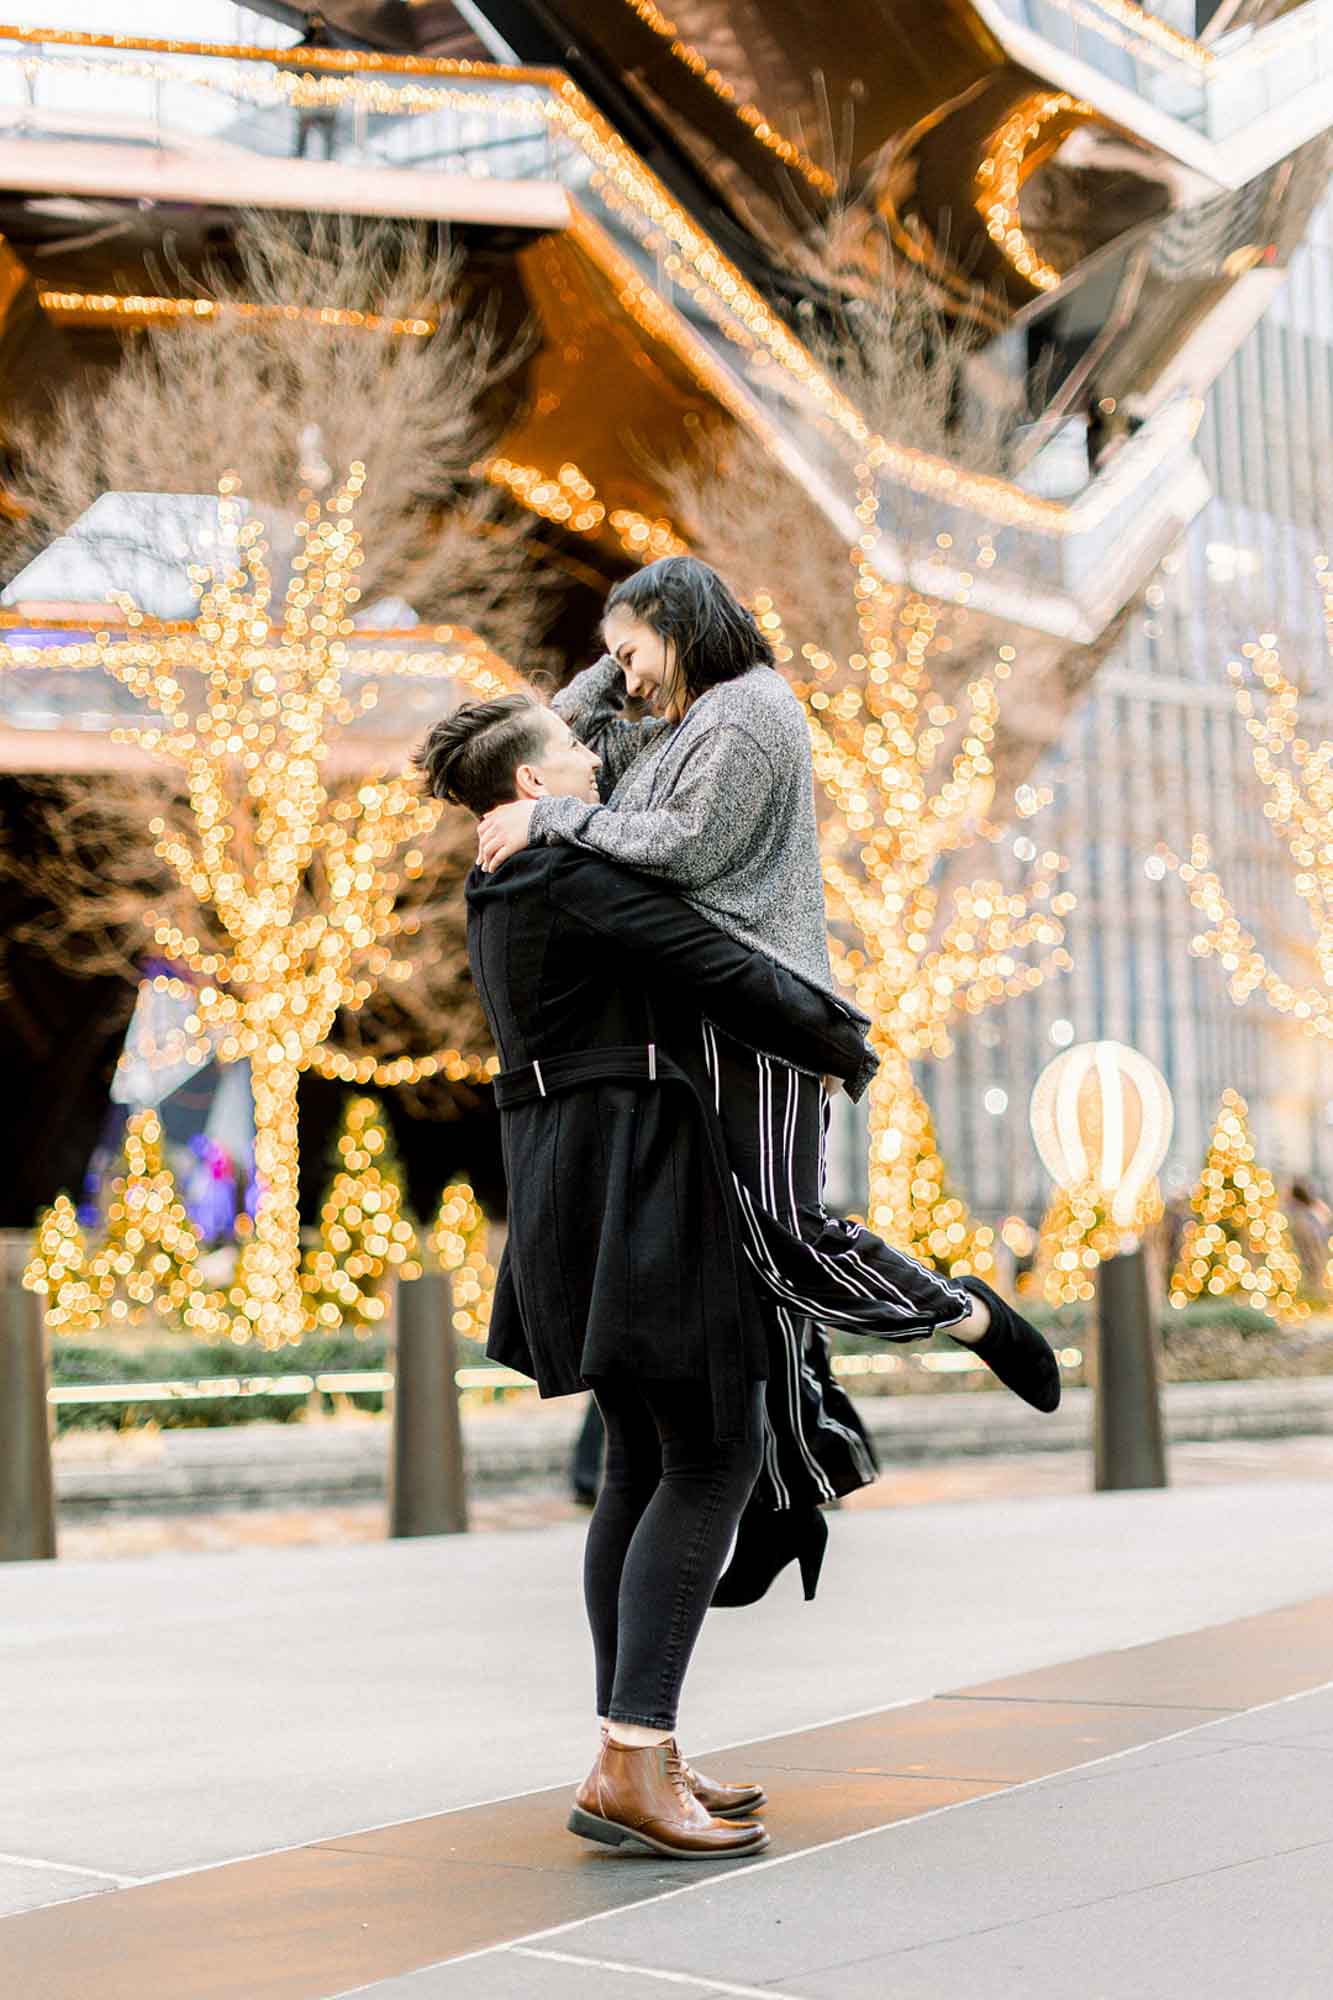 A romantic double proposal on Christmas Eve| Megan and Kenneth | Featured on Equally Wed, the leading LGBTQ+ wedding magazine